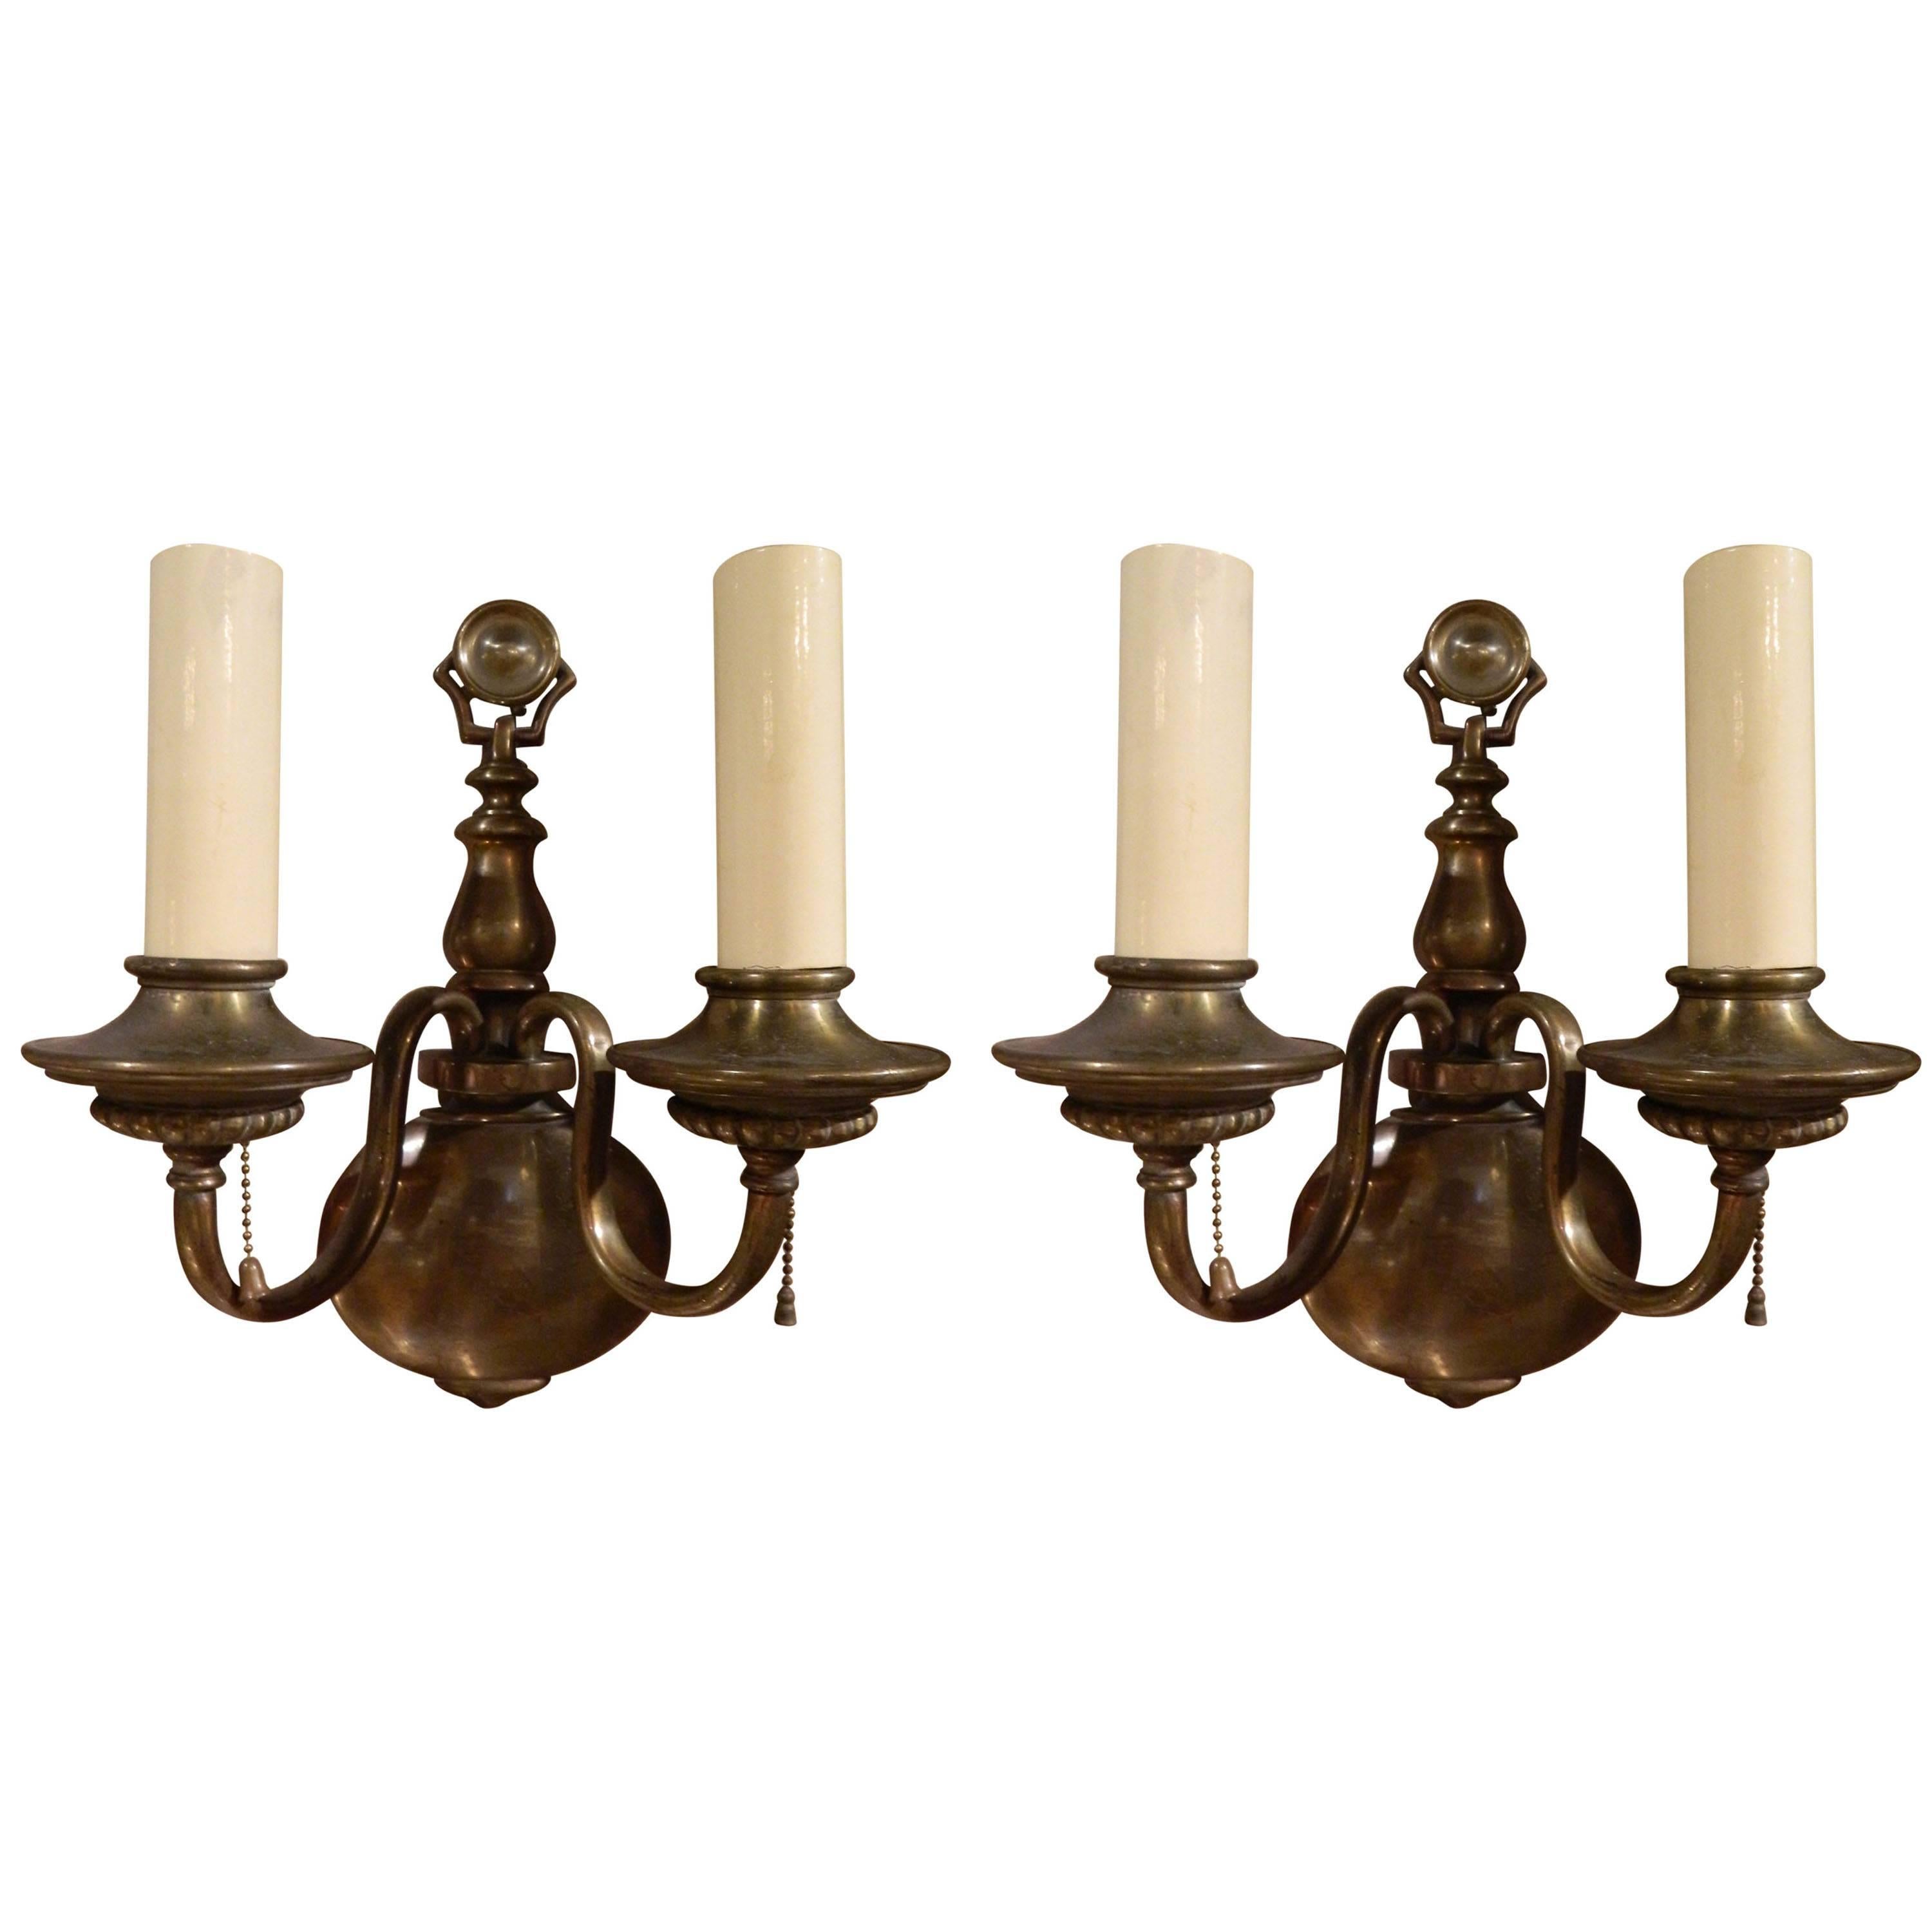 Pair of Solid Brass Two-Light Wall Sconces, Early 20th Century